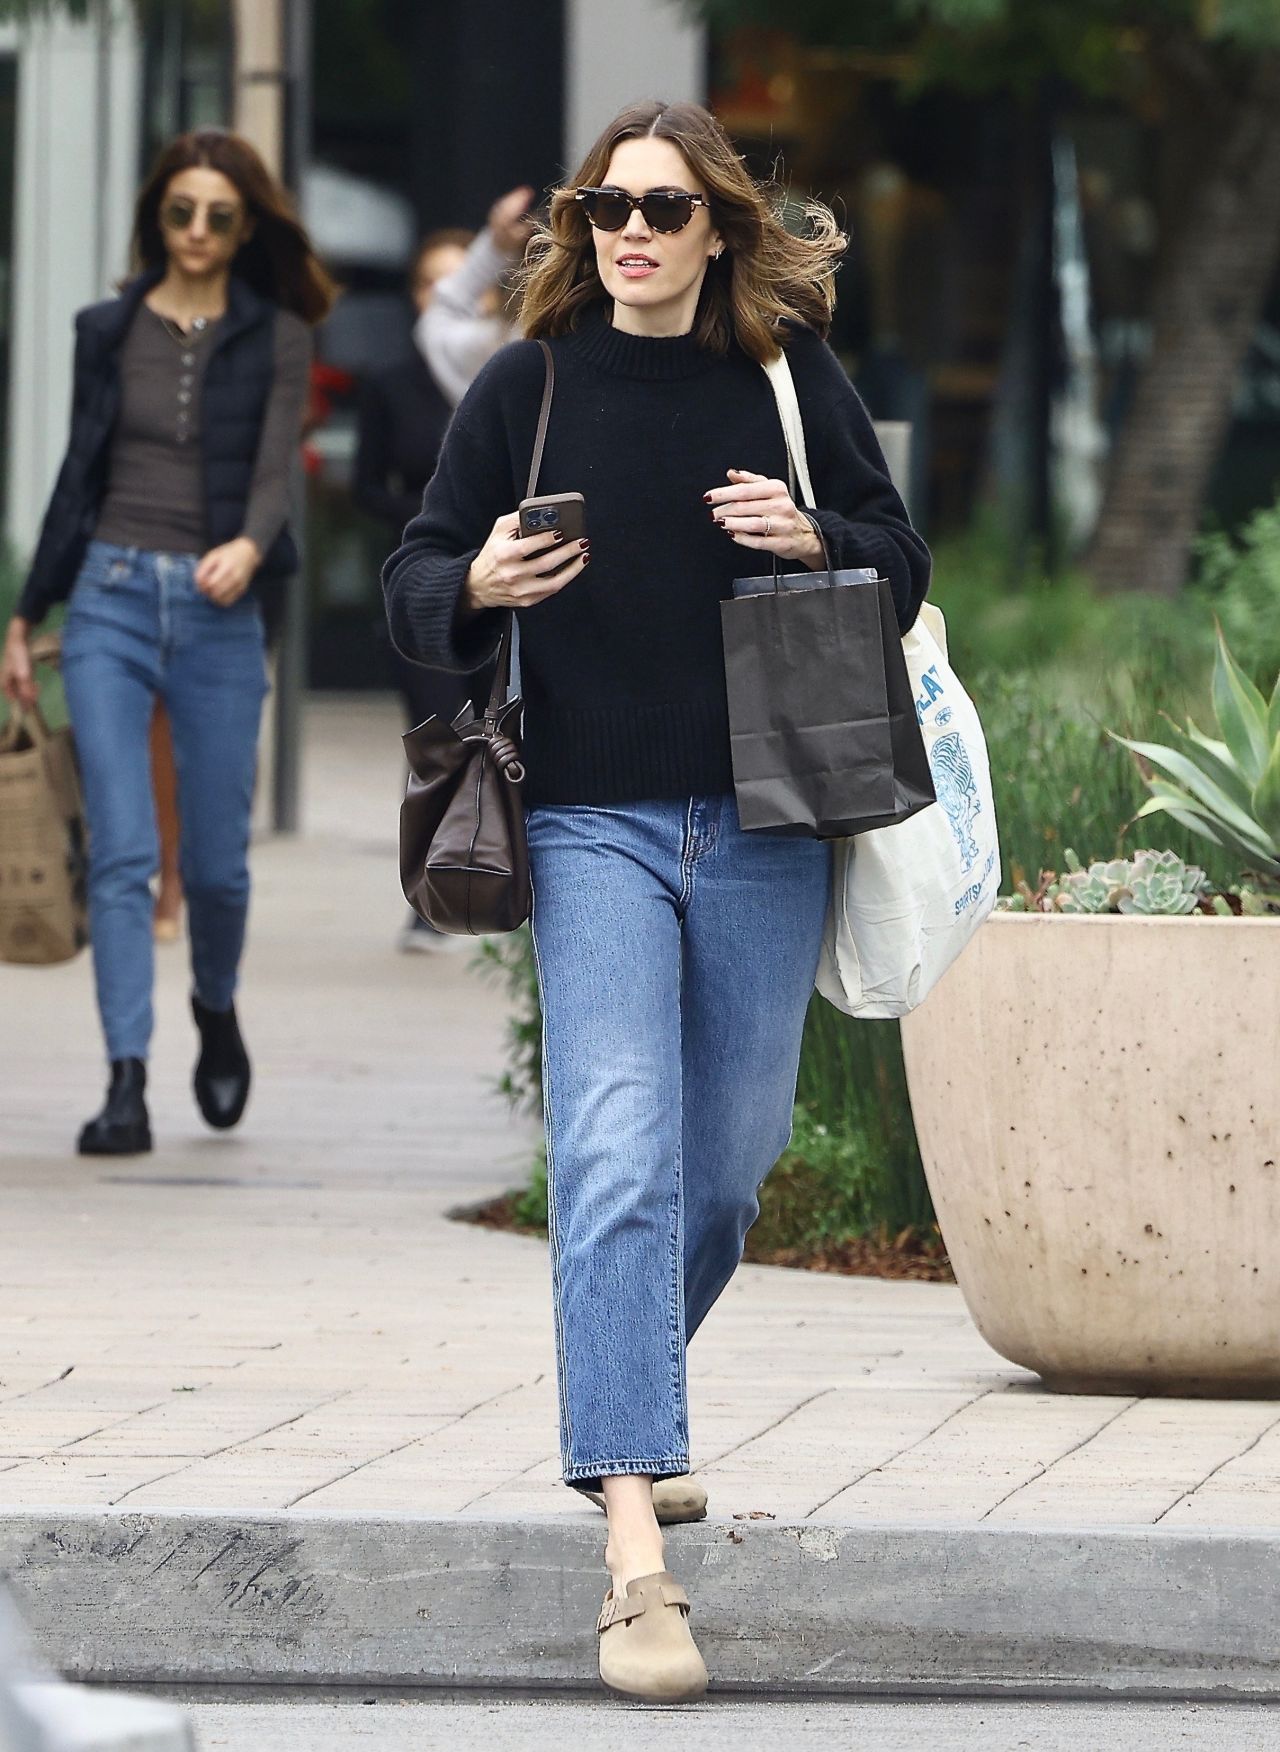 Mandy Moore in a Cozy Black Turtleneck Sweater and Classic Blue Jeans ...